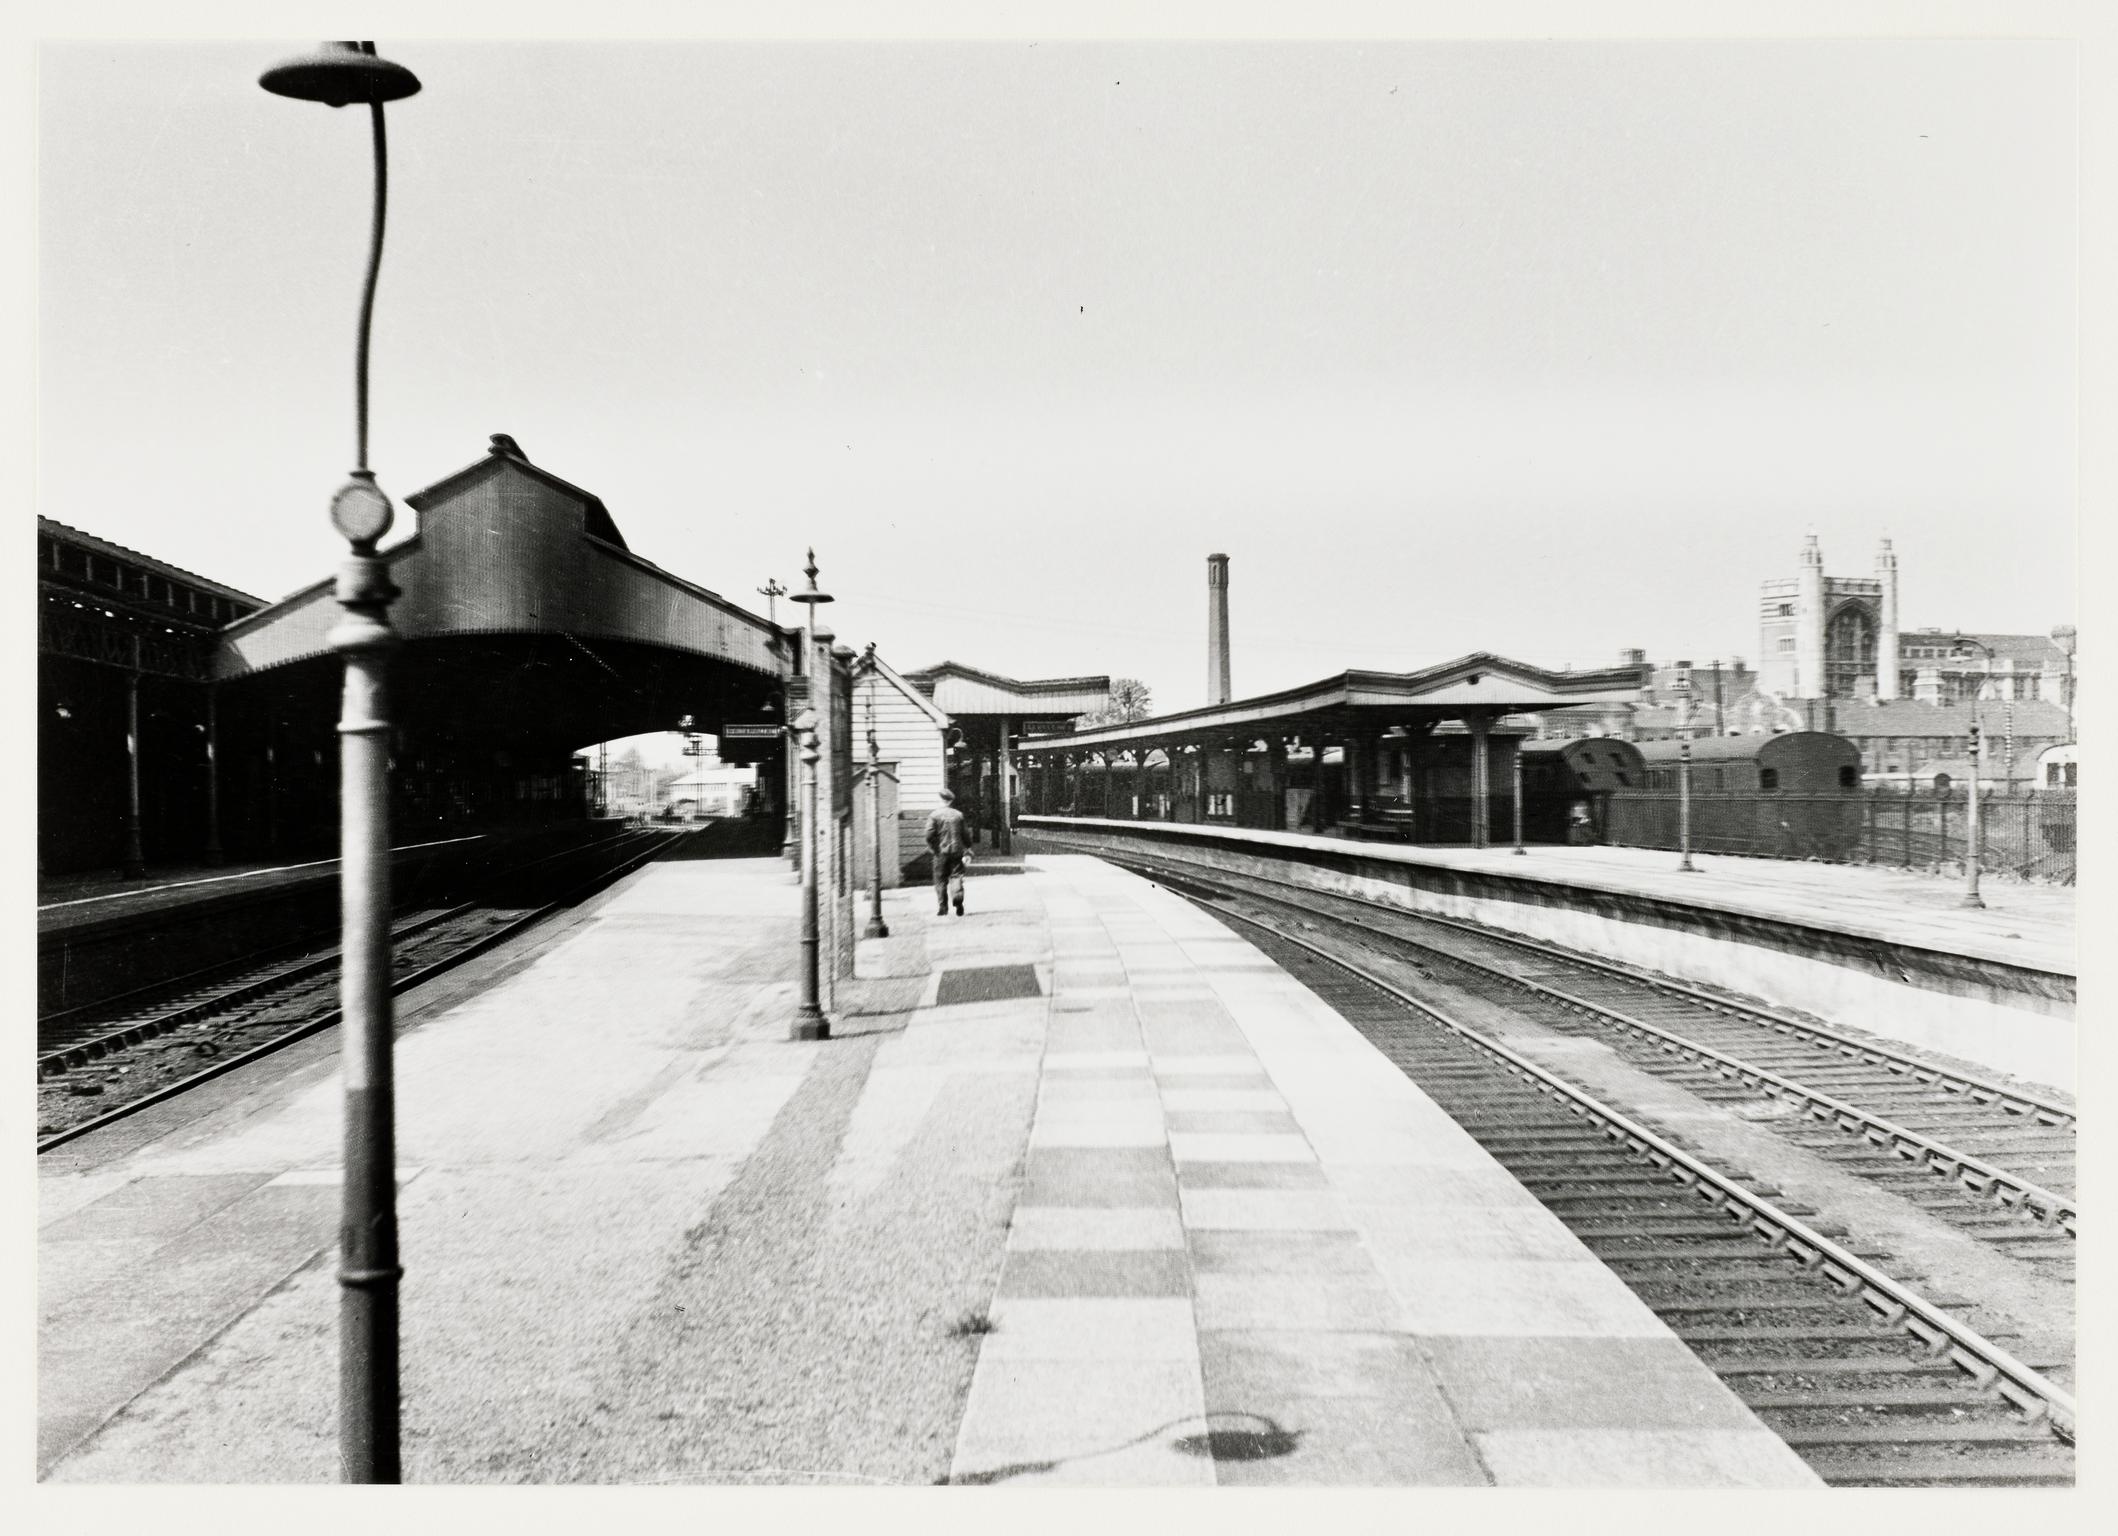 Queen Street Station, Cardiff, photograph